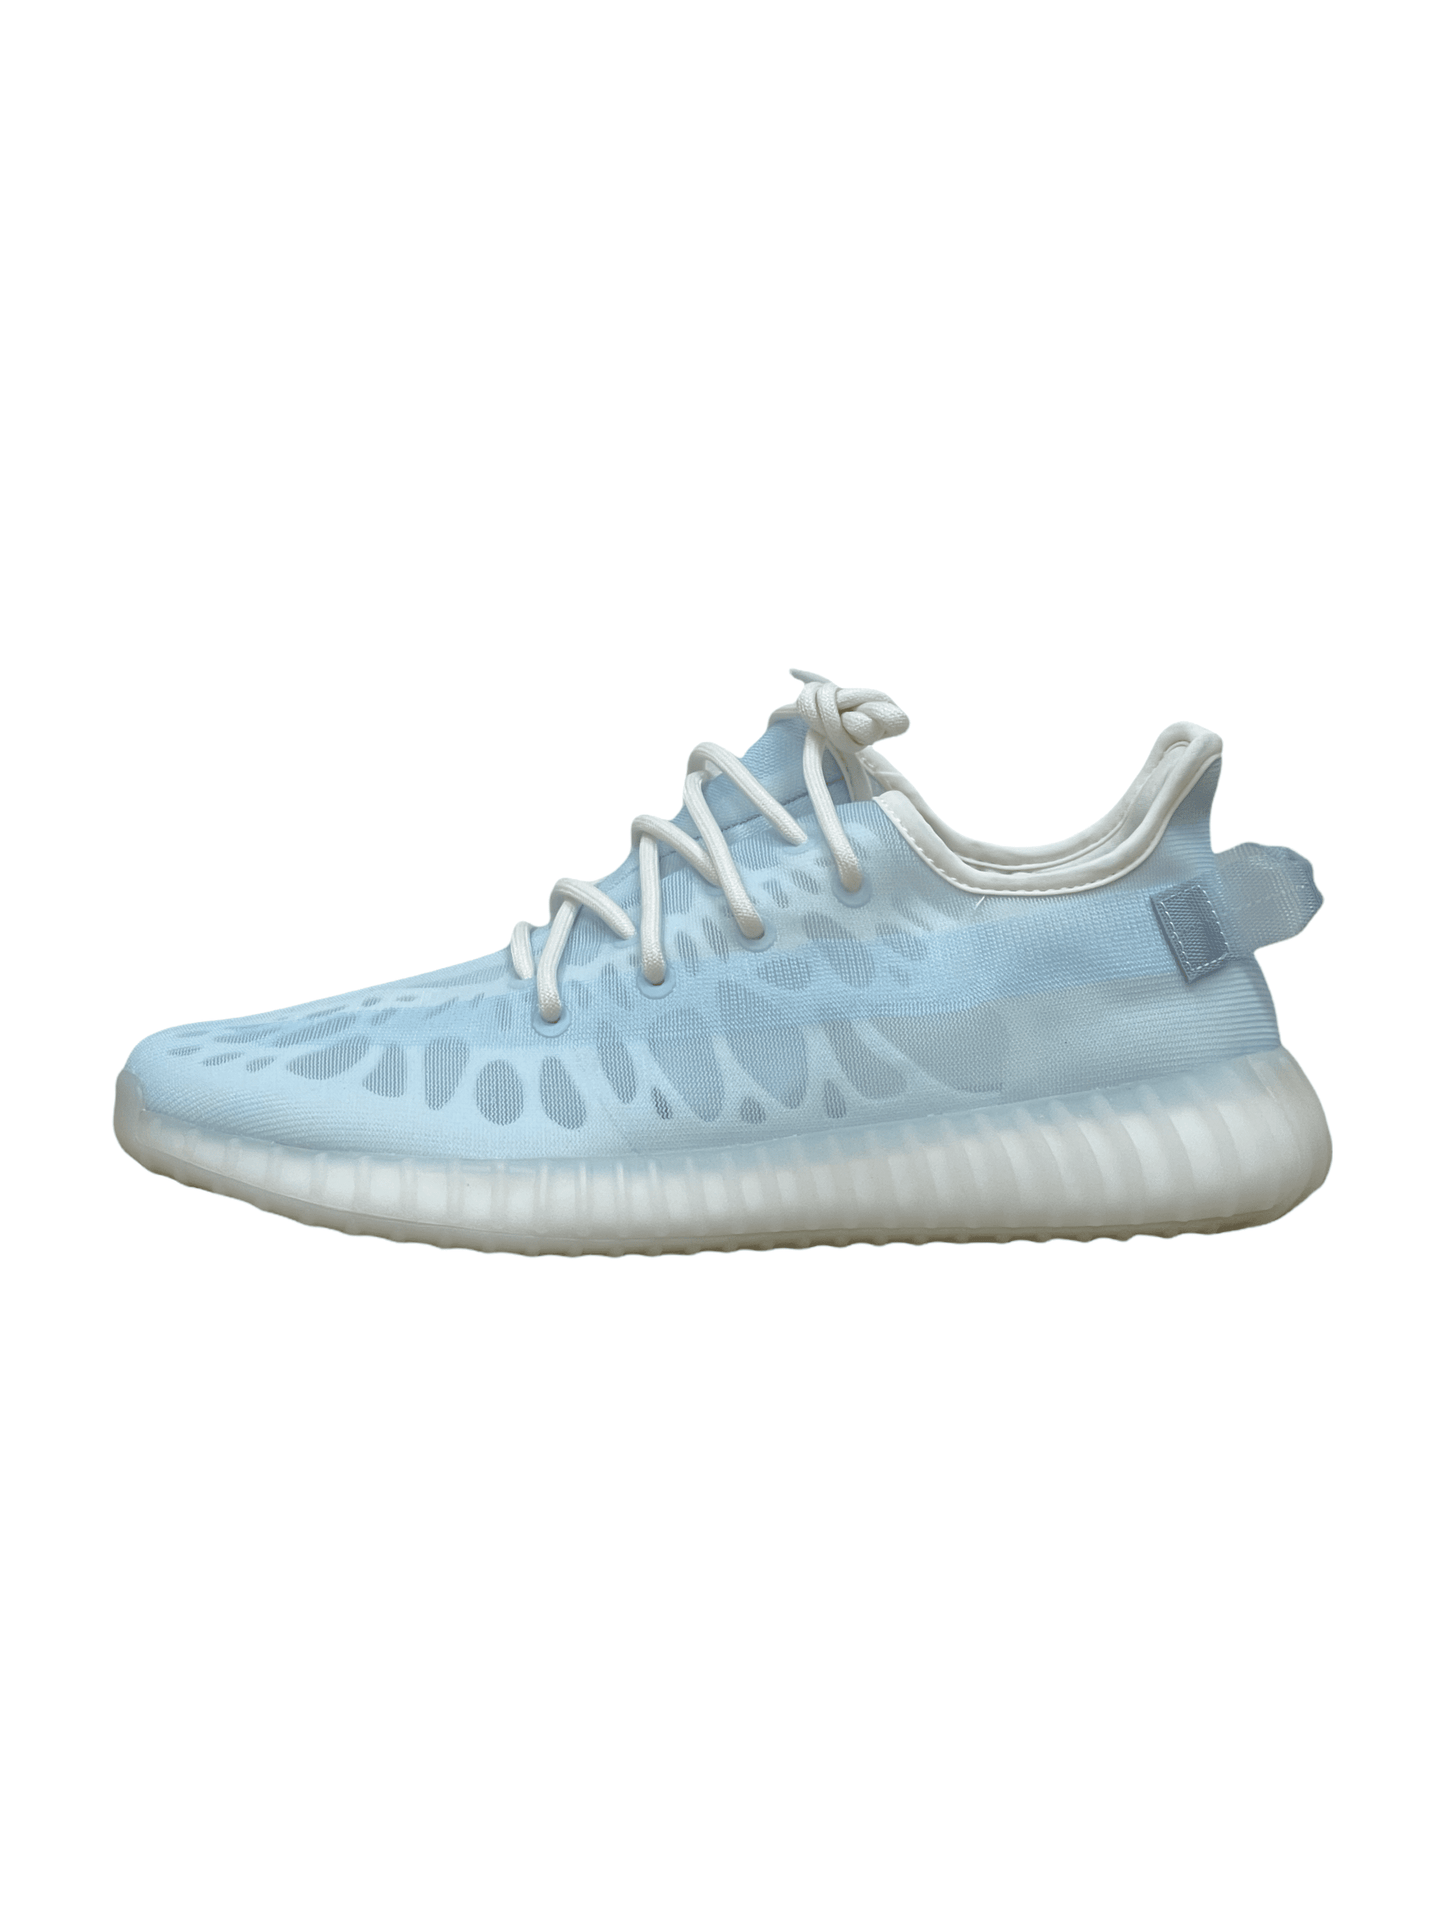 Adidas Yeezy 350 v2 Mono Ice Sneakers - Genuine Design Luxury Consignment for Men. New & Pre-Owned Clothing, Shoes, & Accessories. Calgary, Canada